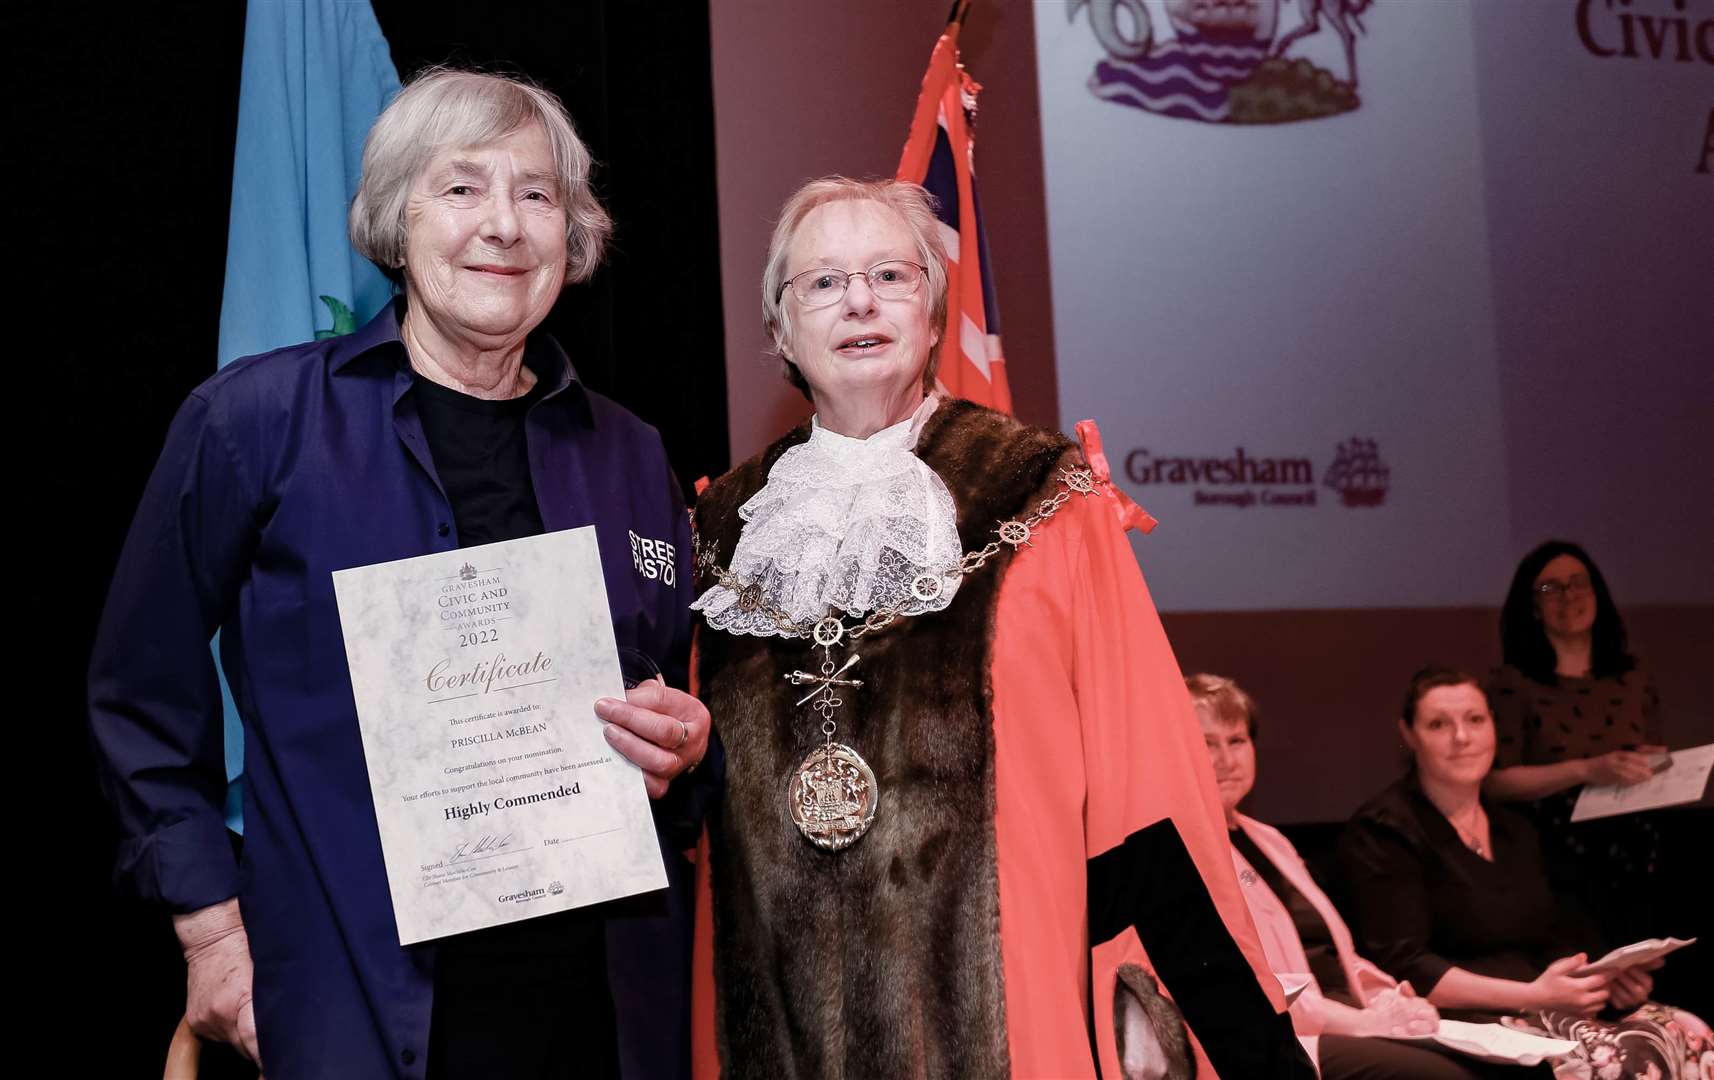 Priscilla McBean, left, with the outgoing Mayor of Gravesham, Cllr Lyn Milner. Photo: Gravesham council